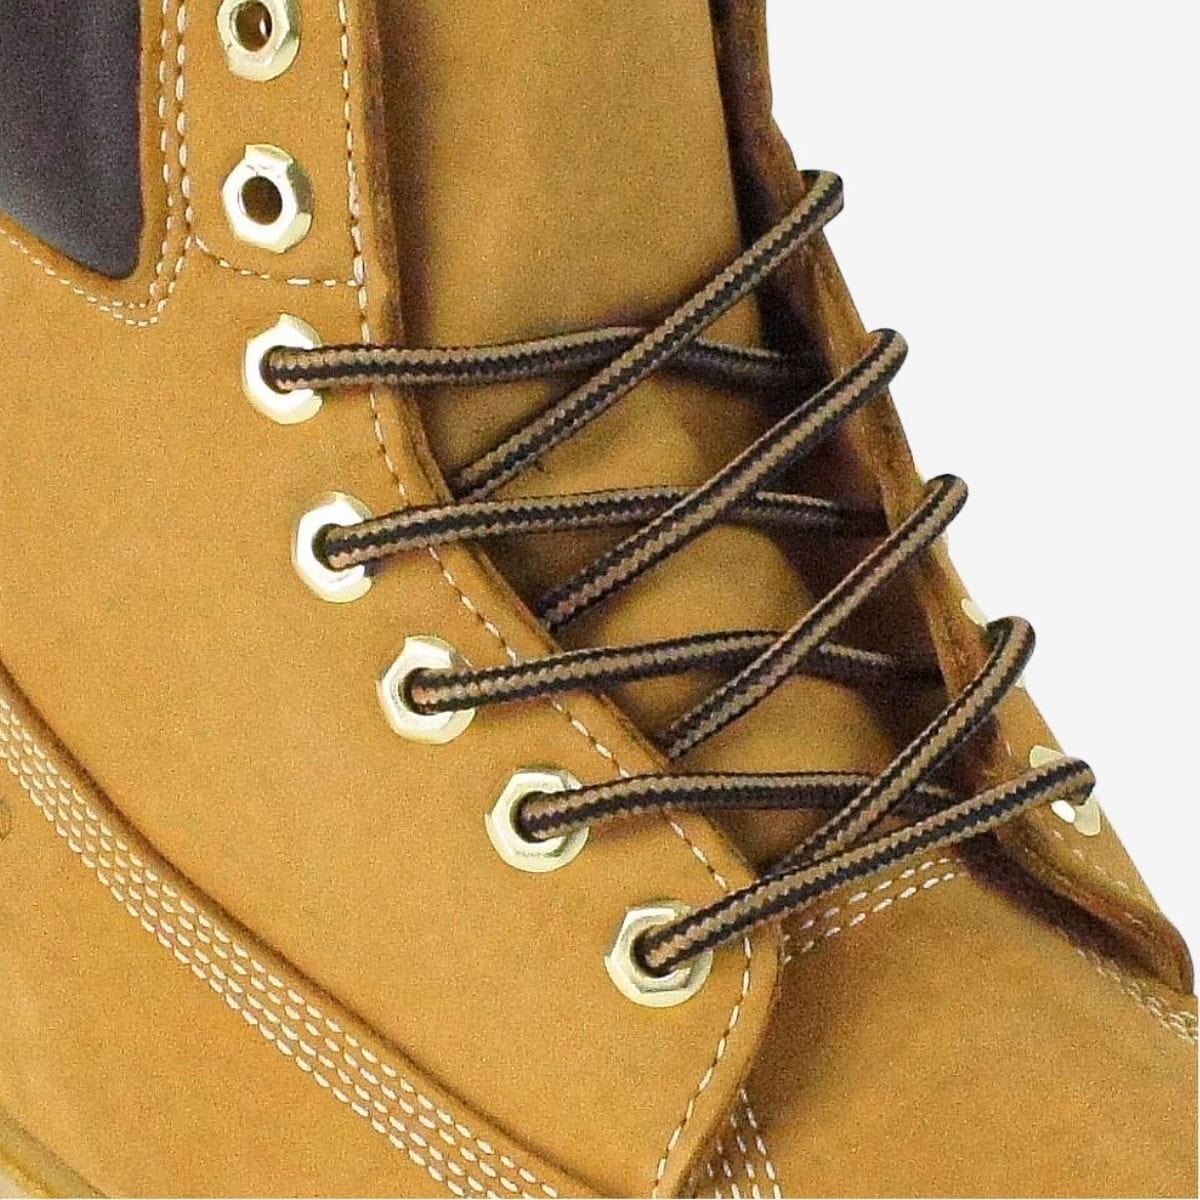 shop-round-shoelaces-online-in-light-brown-and-black-for-boots-sneakers-and-running-shoes